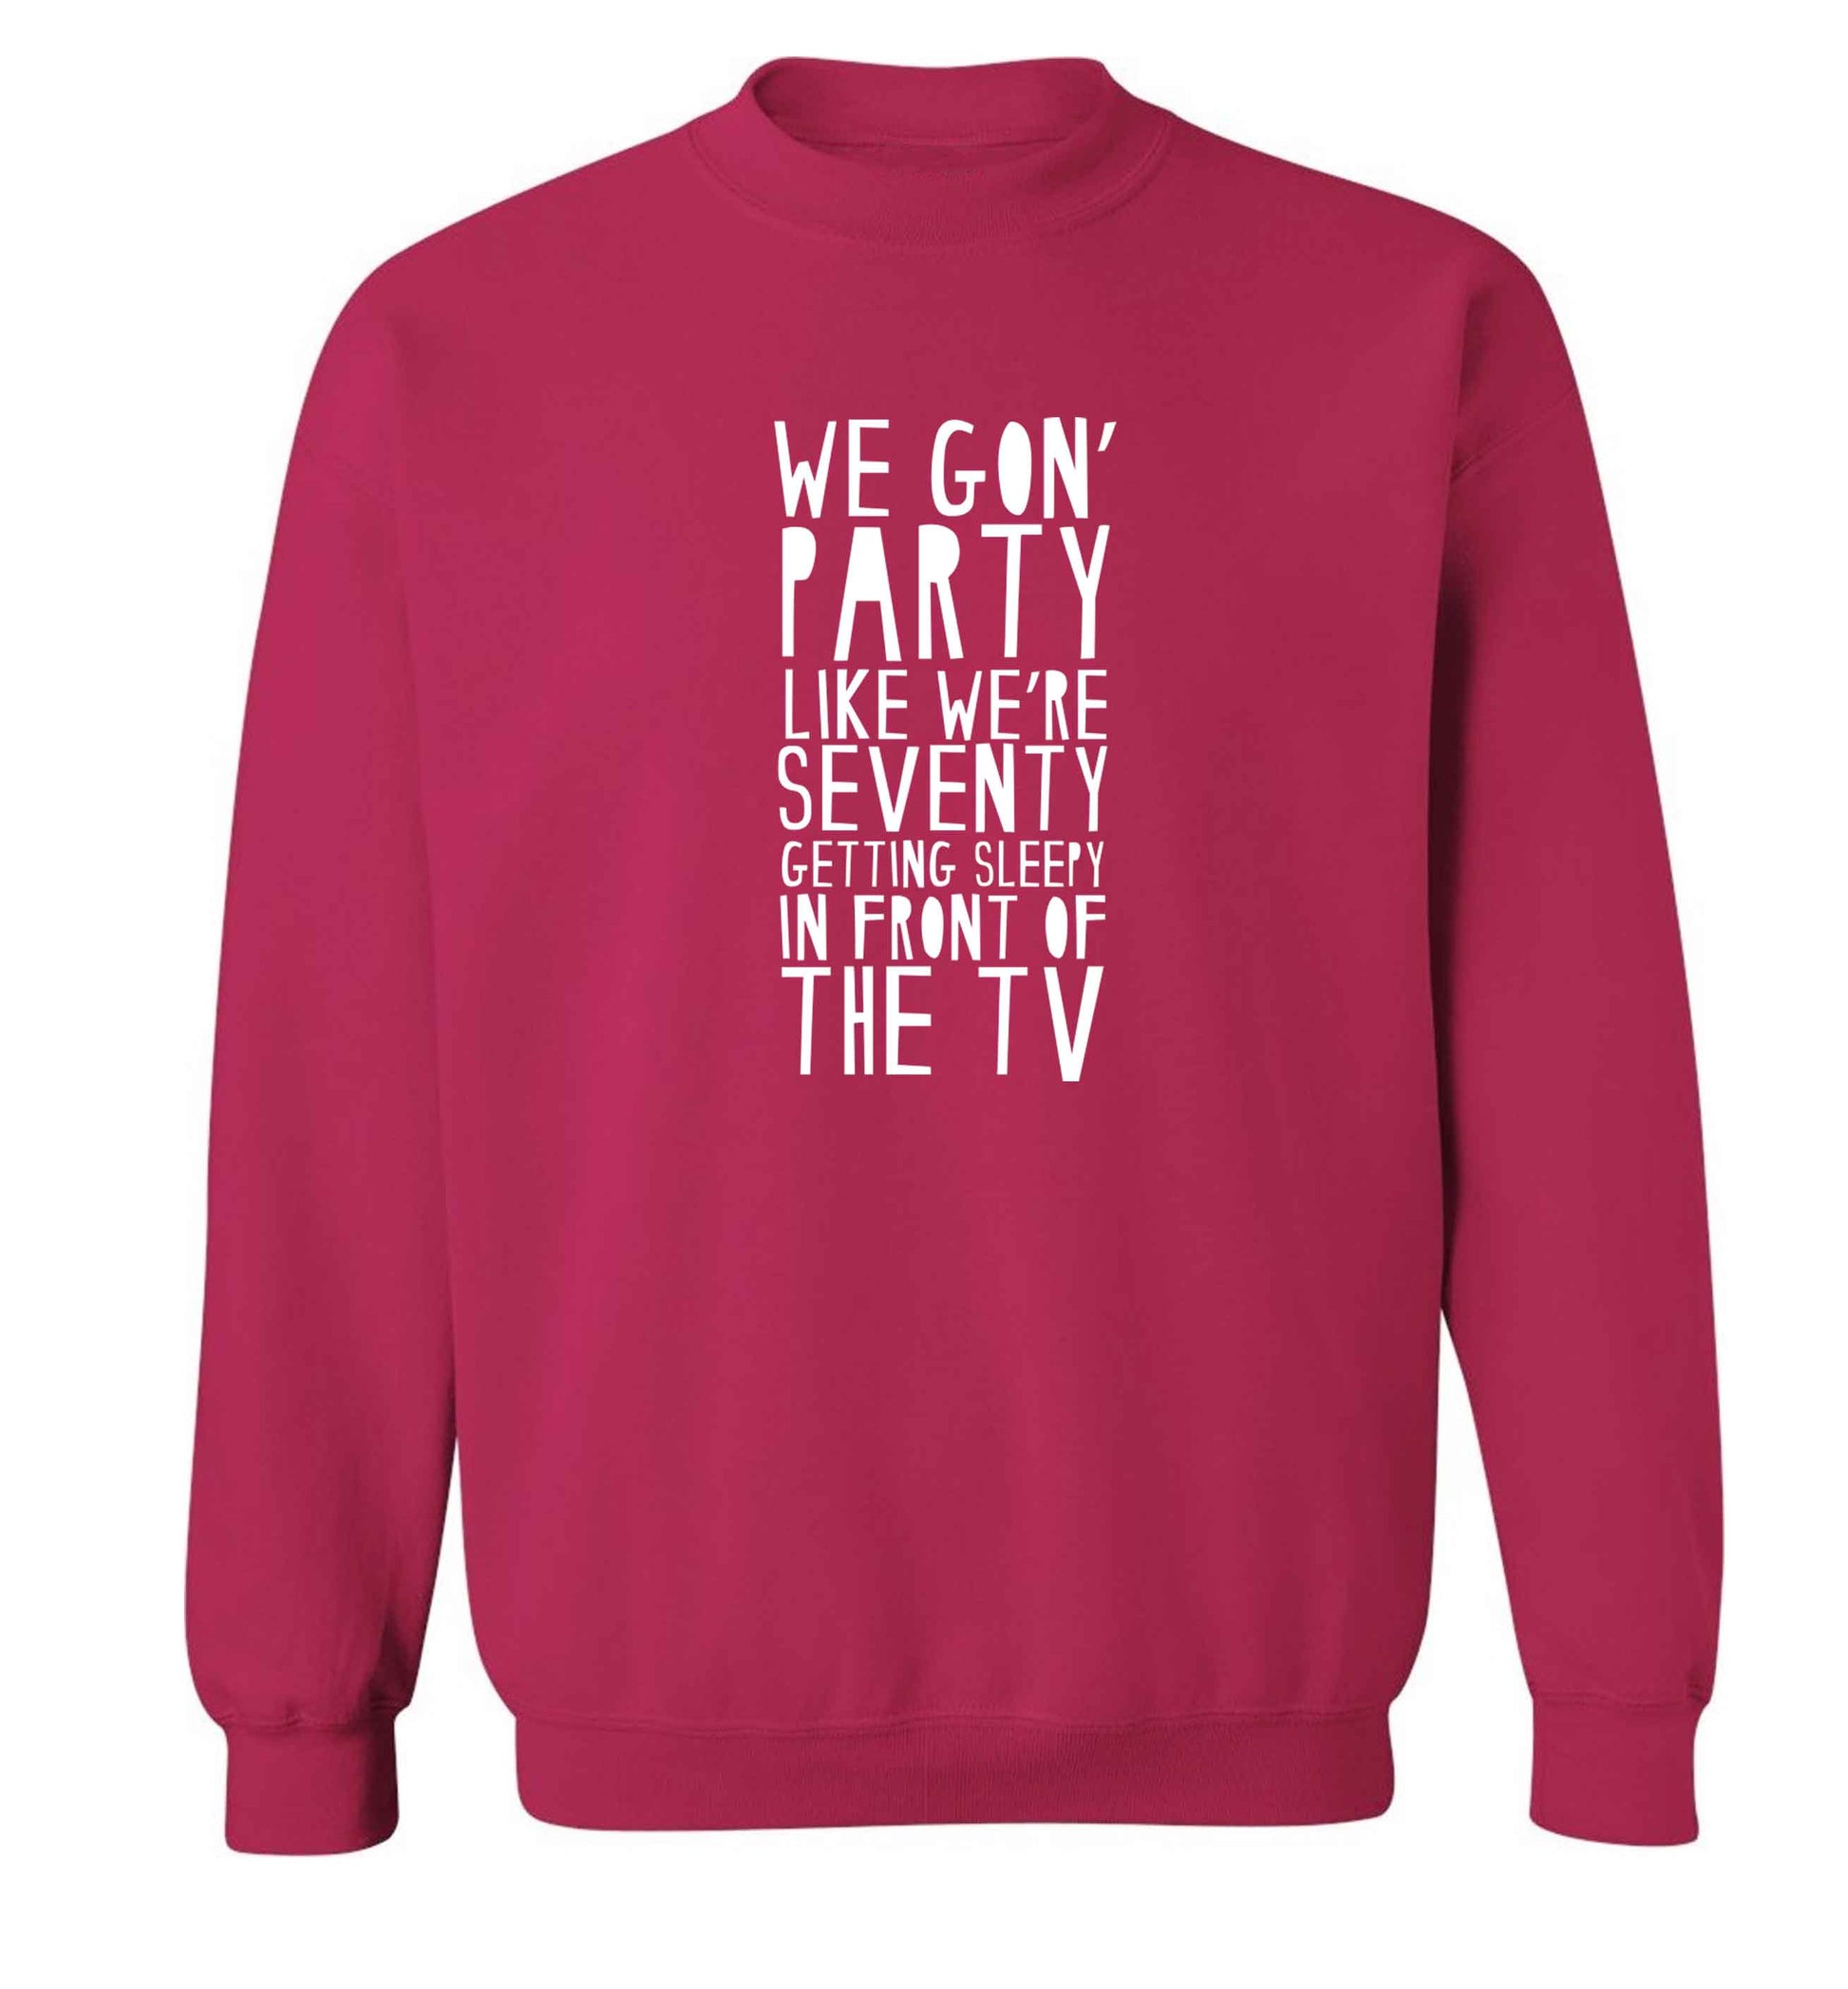 We gon' party like we're seventy getting sleepy in front of the TV adult's unisex pink sweater 2XL